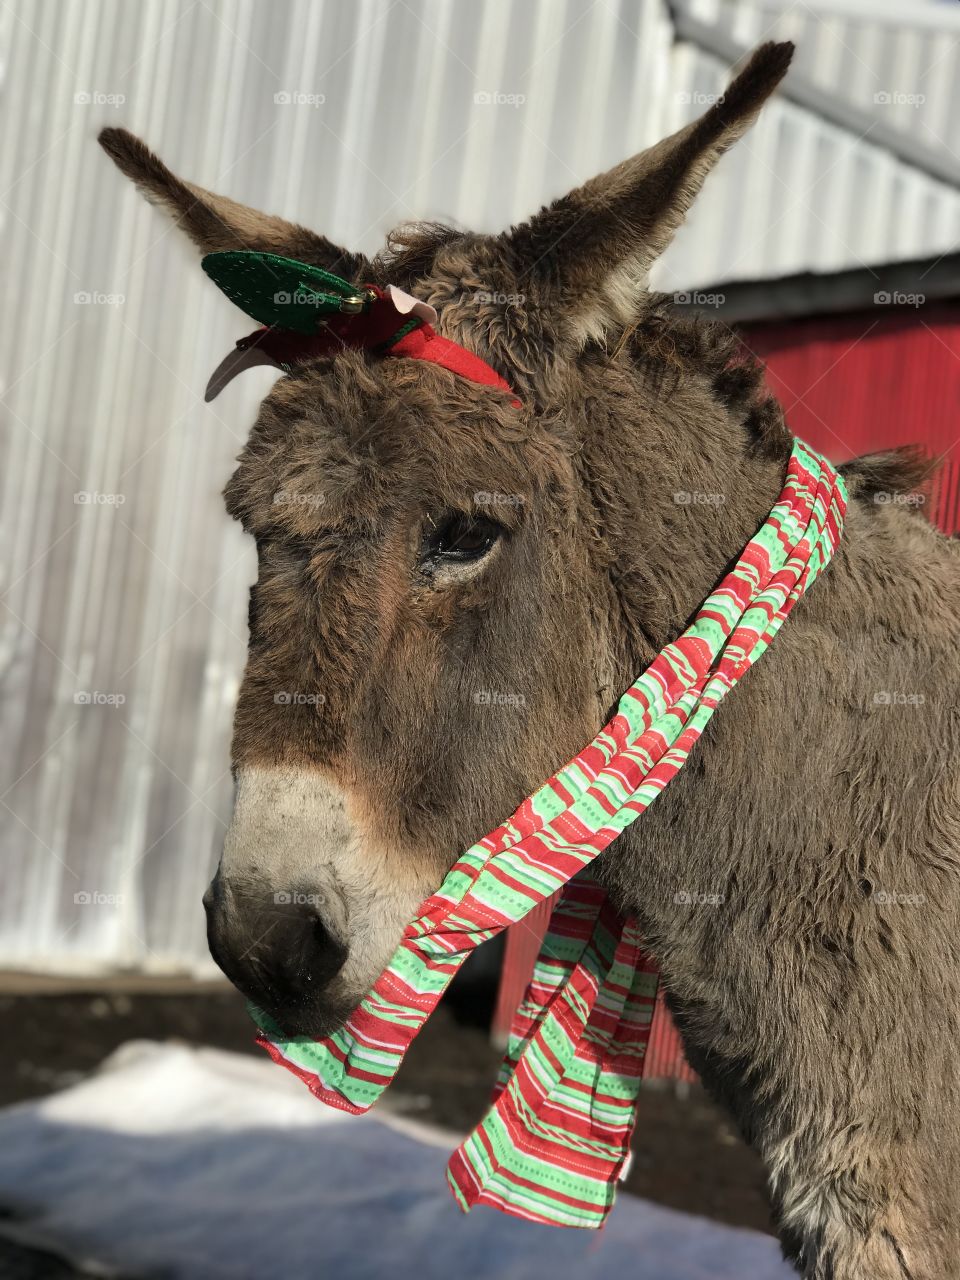 Decorated our donkey! She says Merry Christmas!